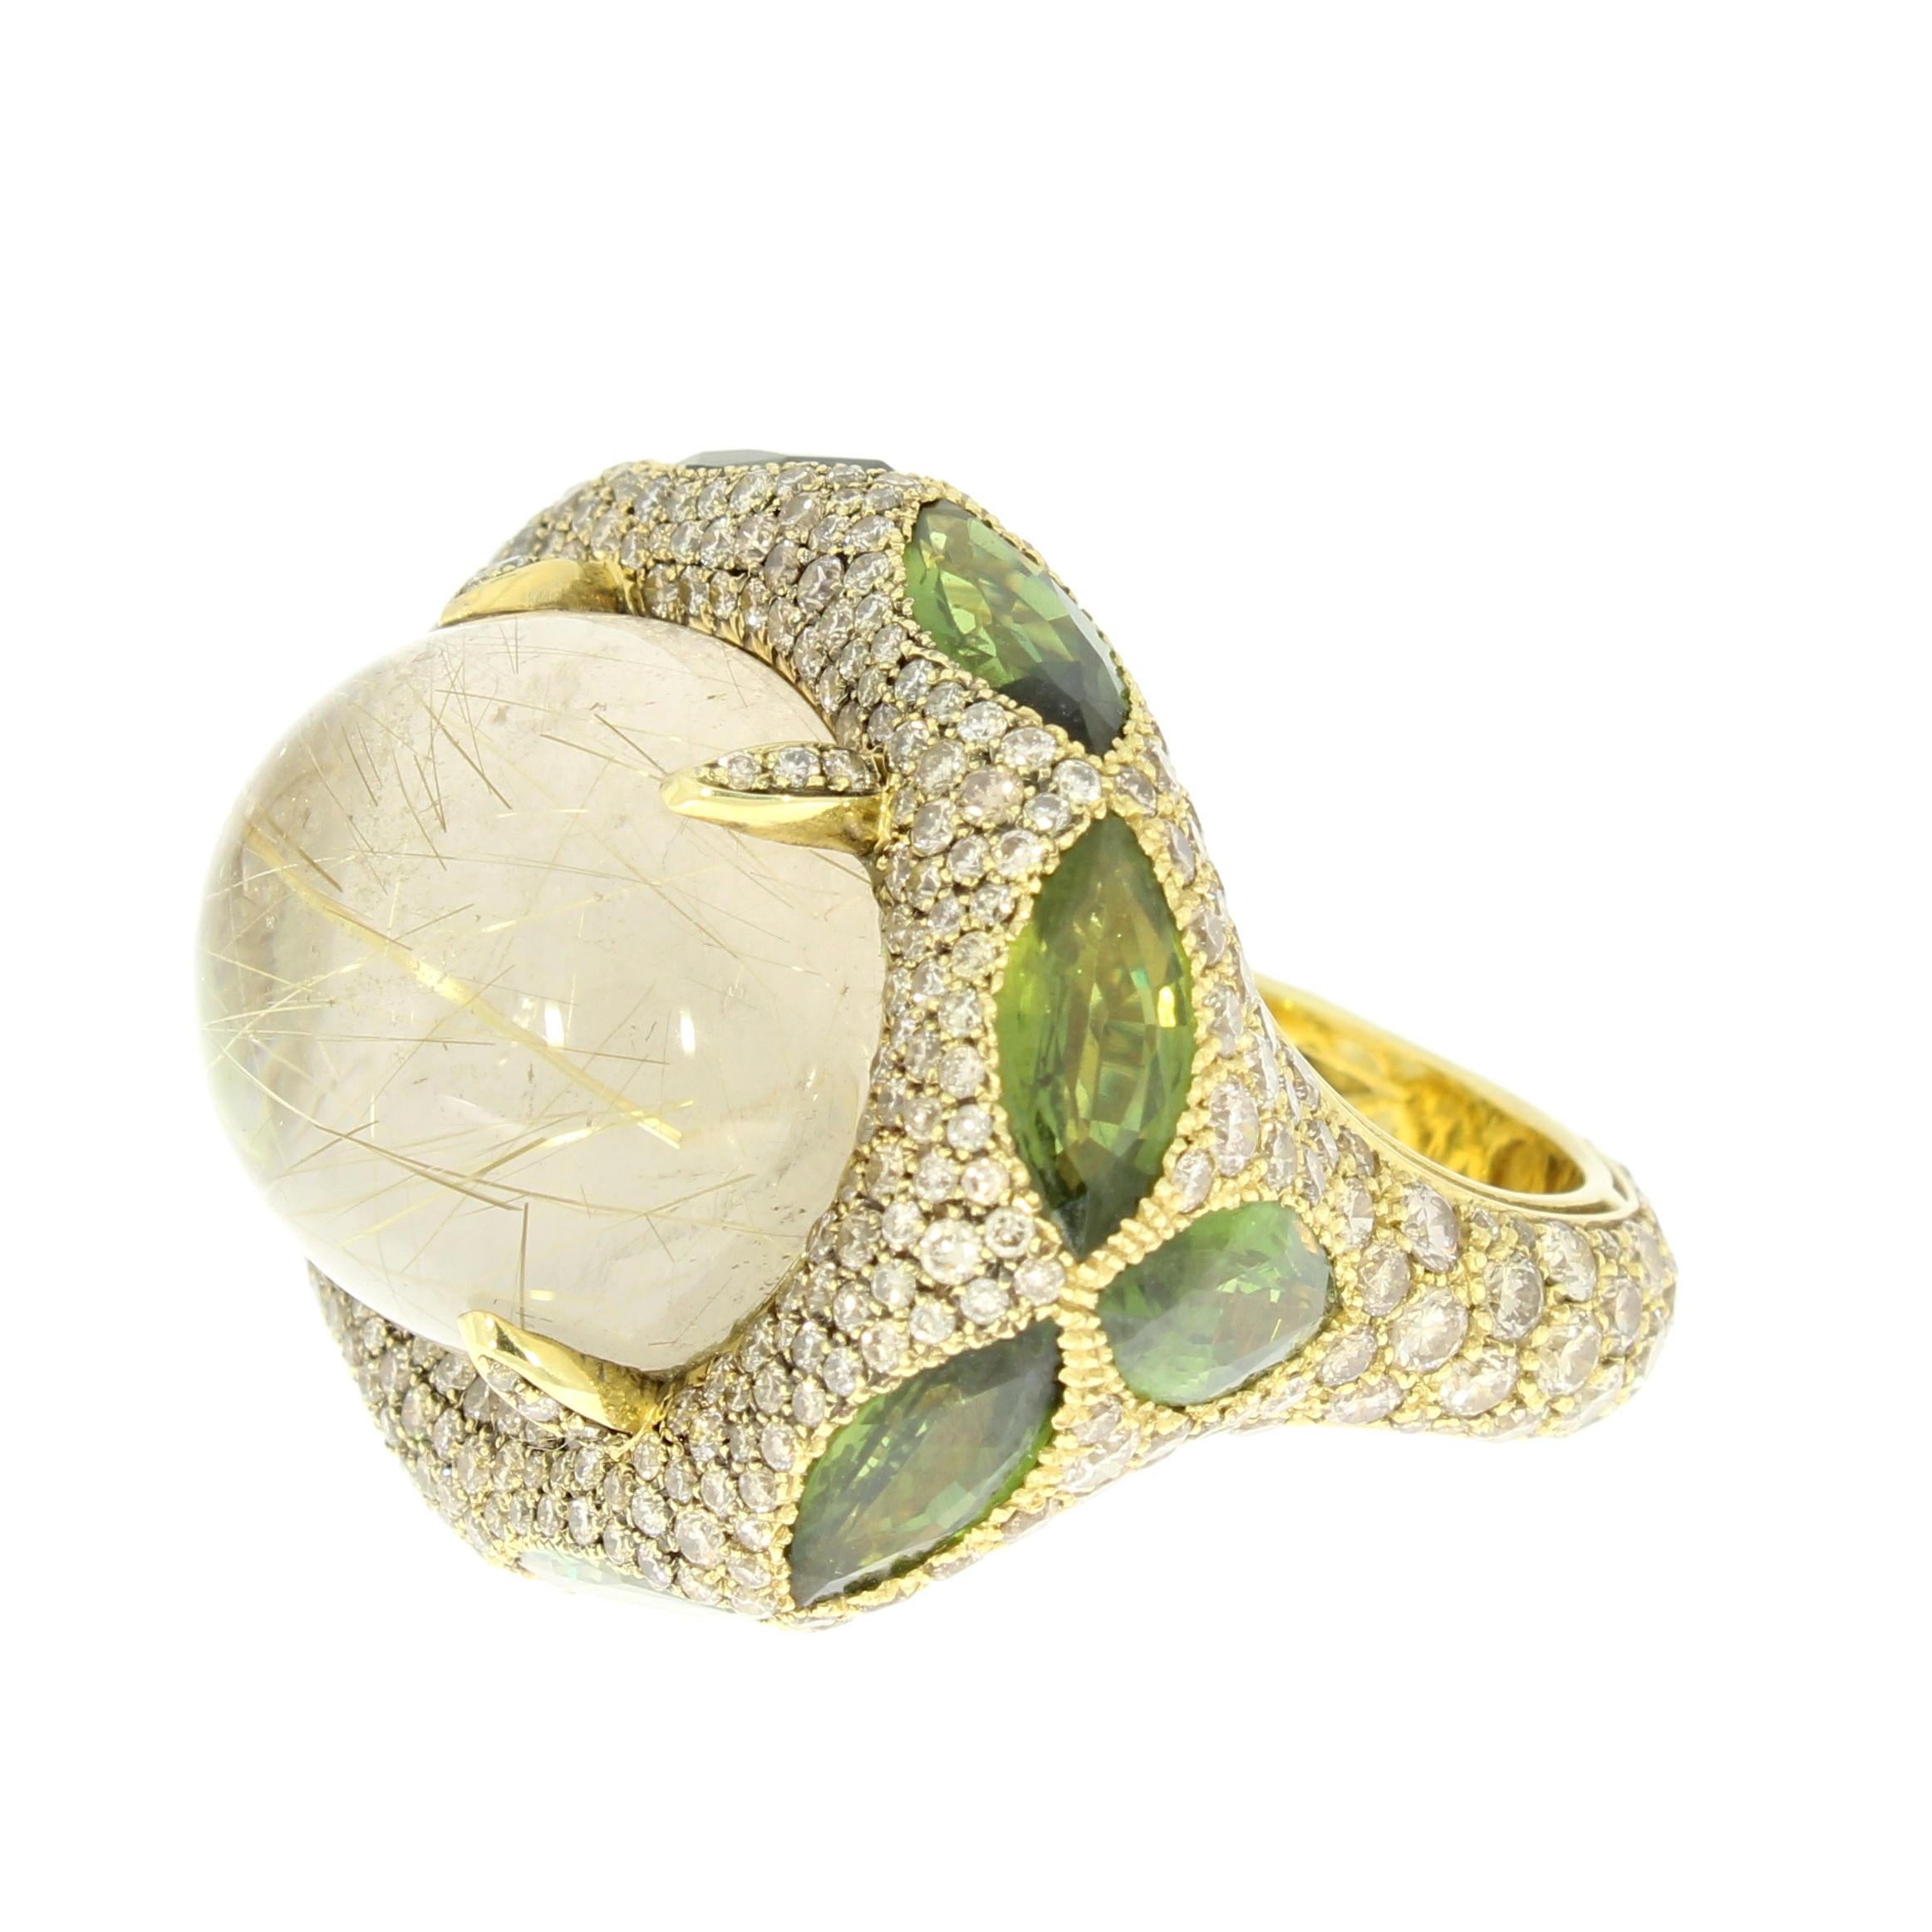 A Cabochon Gold Rutilated Quartz sumptuously nestled among a pave setting of elegant champagne diamonds brilliant cut Diamonds and Marquise cut green sapphires. The Diamonds runs all around the ring. 

18 Karat Yellow Gold (13 grams) 
40 Carats